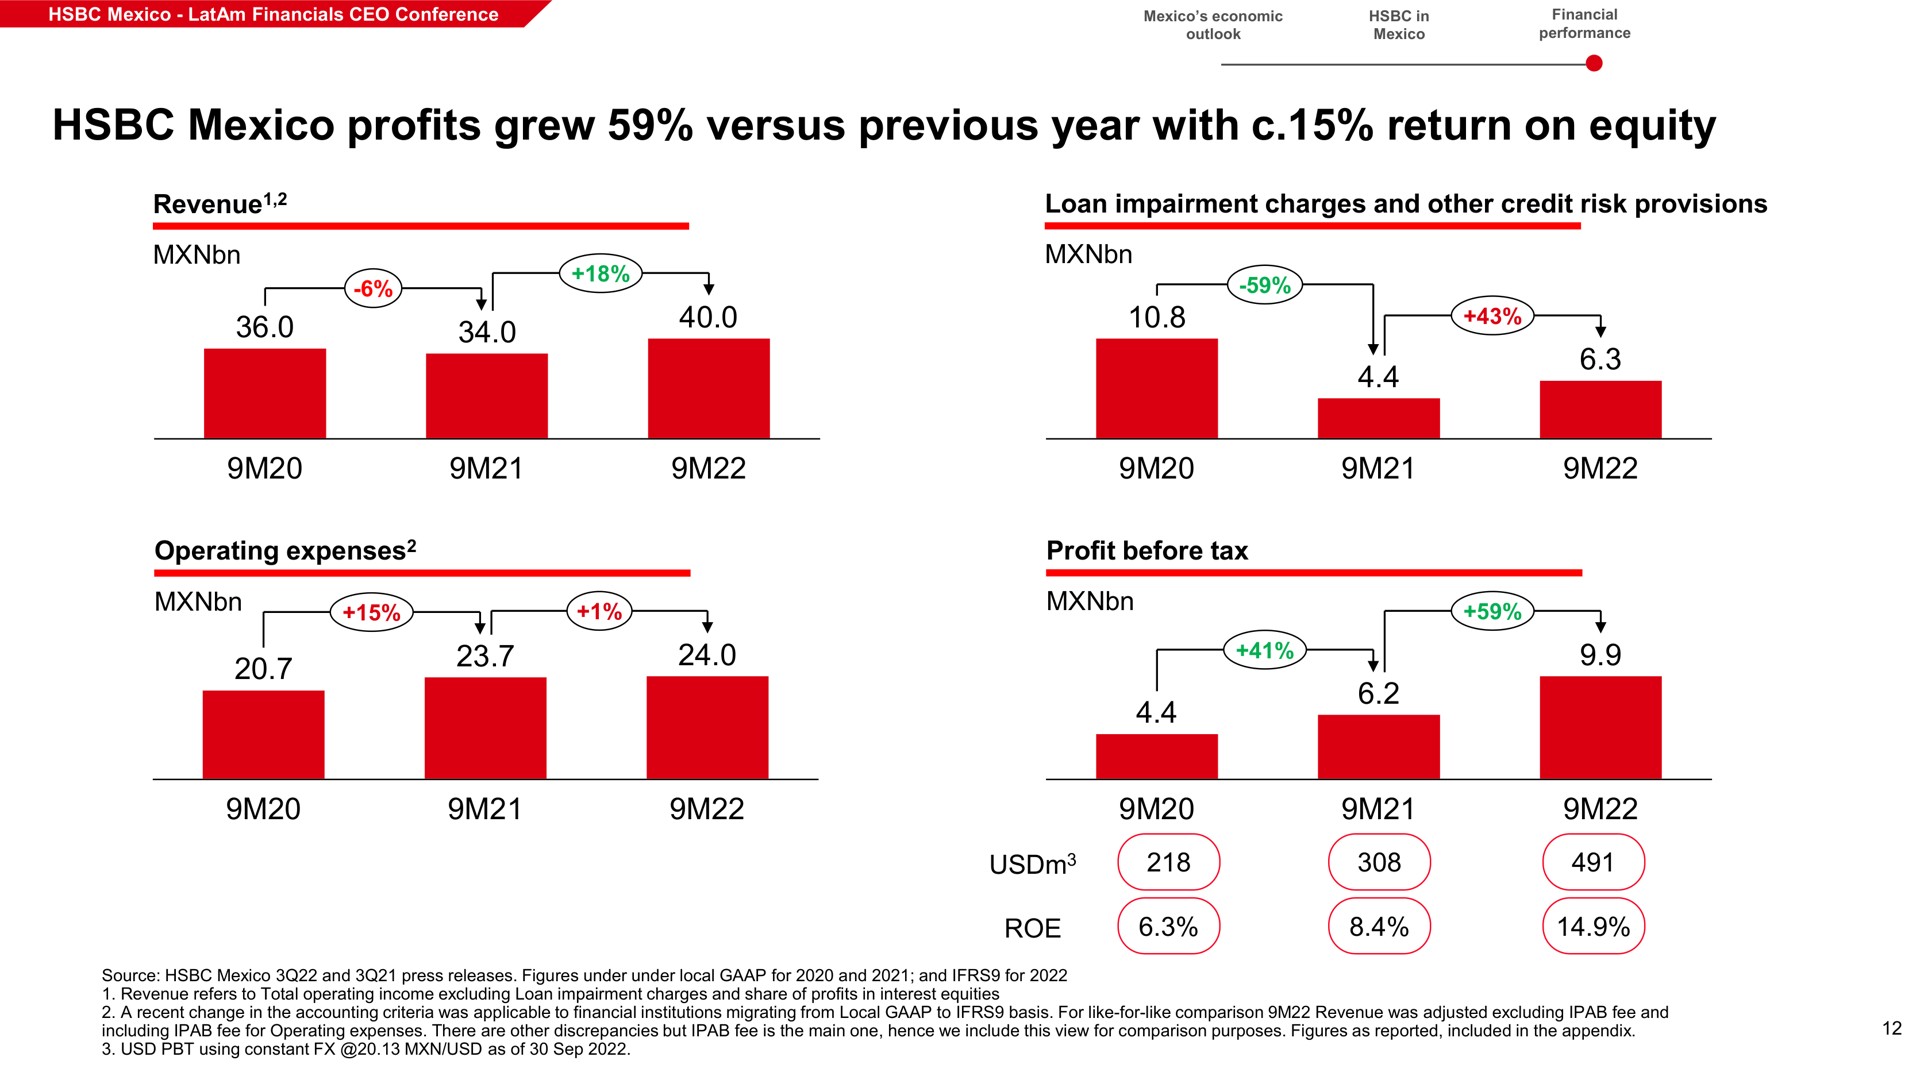 profits grew versus previous year with return on equity a | HSBC